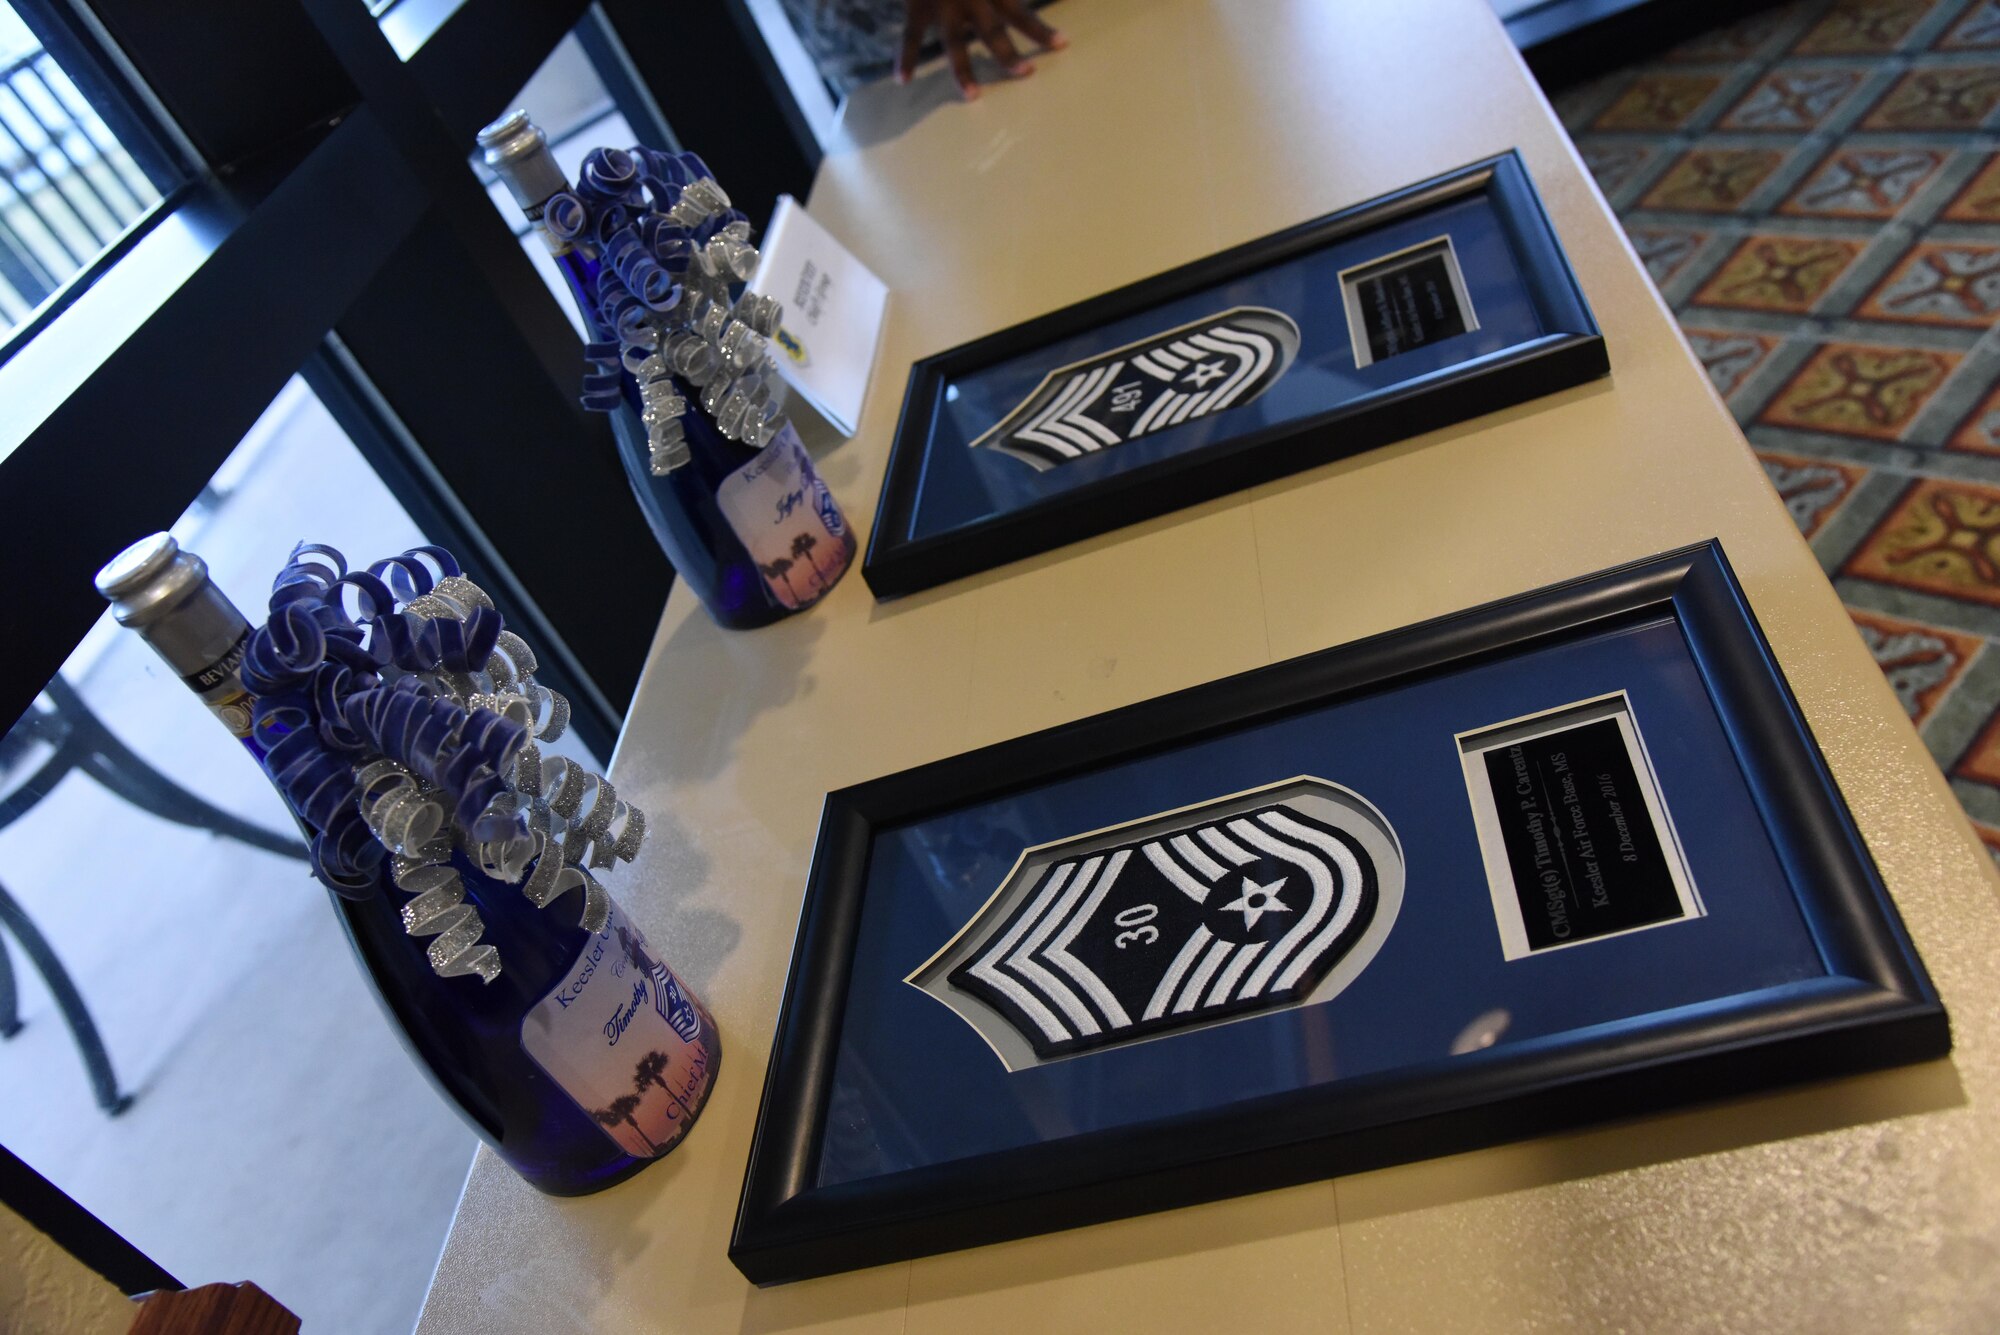 Promotion gifts sit on display during a chief master sergeant select recognition ceremony at the Bay Breeze Event Center Dec. 8, 2016, on Keesler Air Force Base, Miss. Base leadership recognized the three Keesler senior NCOs, Senior Master Sgts. Timothy Carentz, 81st Medical Operations Squadron superintendent, Jeffrey Bankoske, Mathies NCO Academy director of education, and Larry Jackson, 81st Operations Support Flight superintendent, for their selection to join the top 1 percent of the Air Force’s enlisted force. (U.S. Air Force photo by Kemberly Groue)

